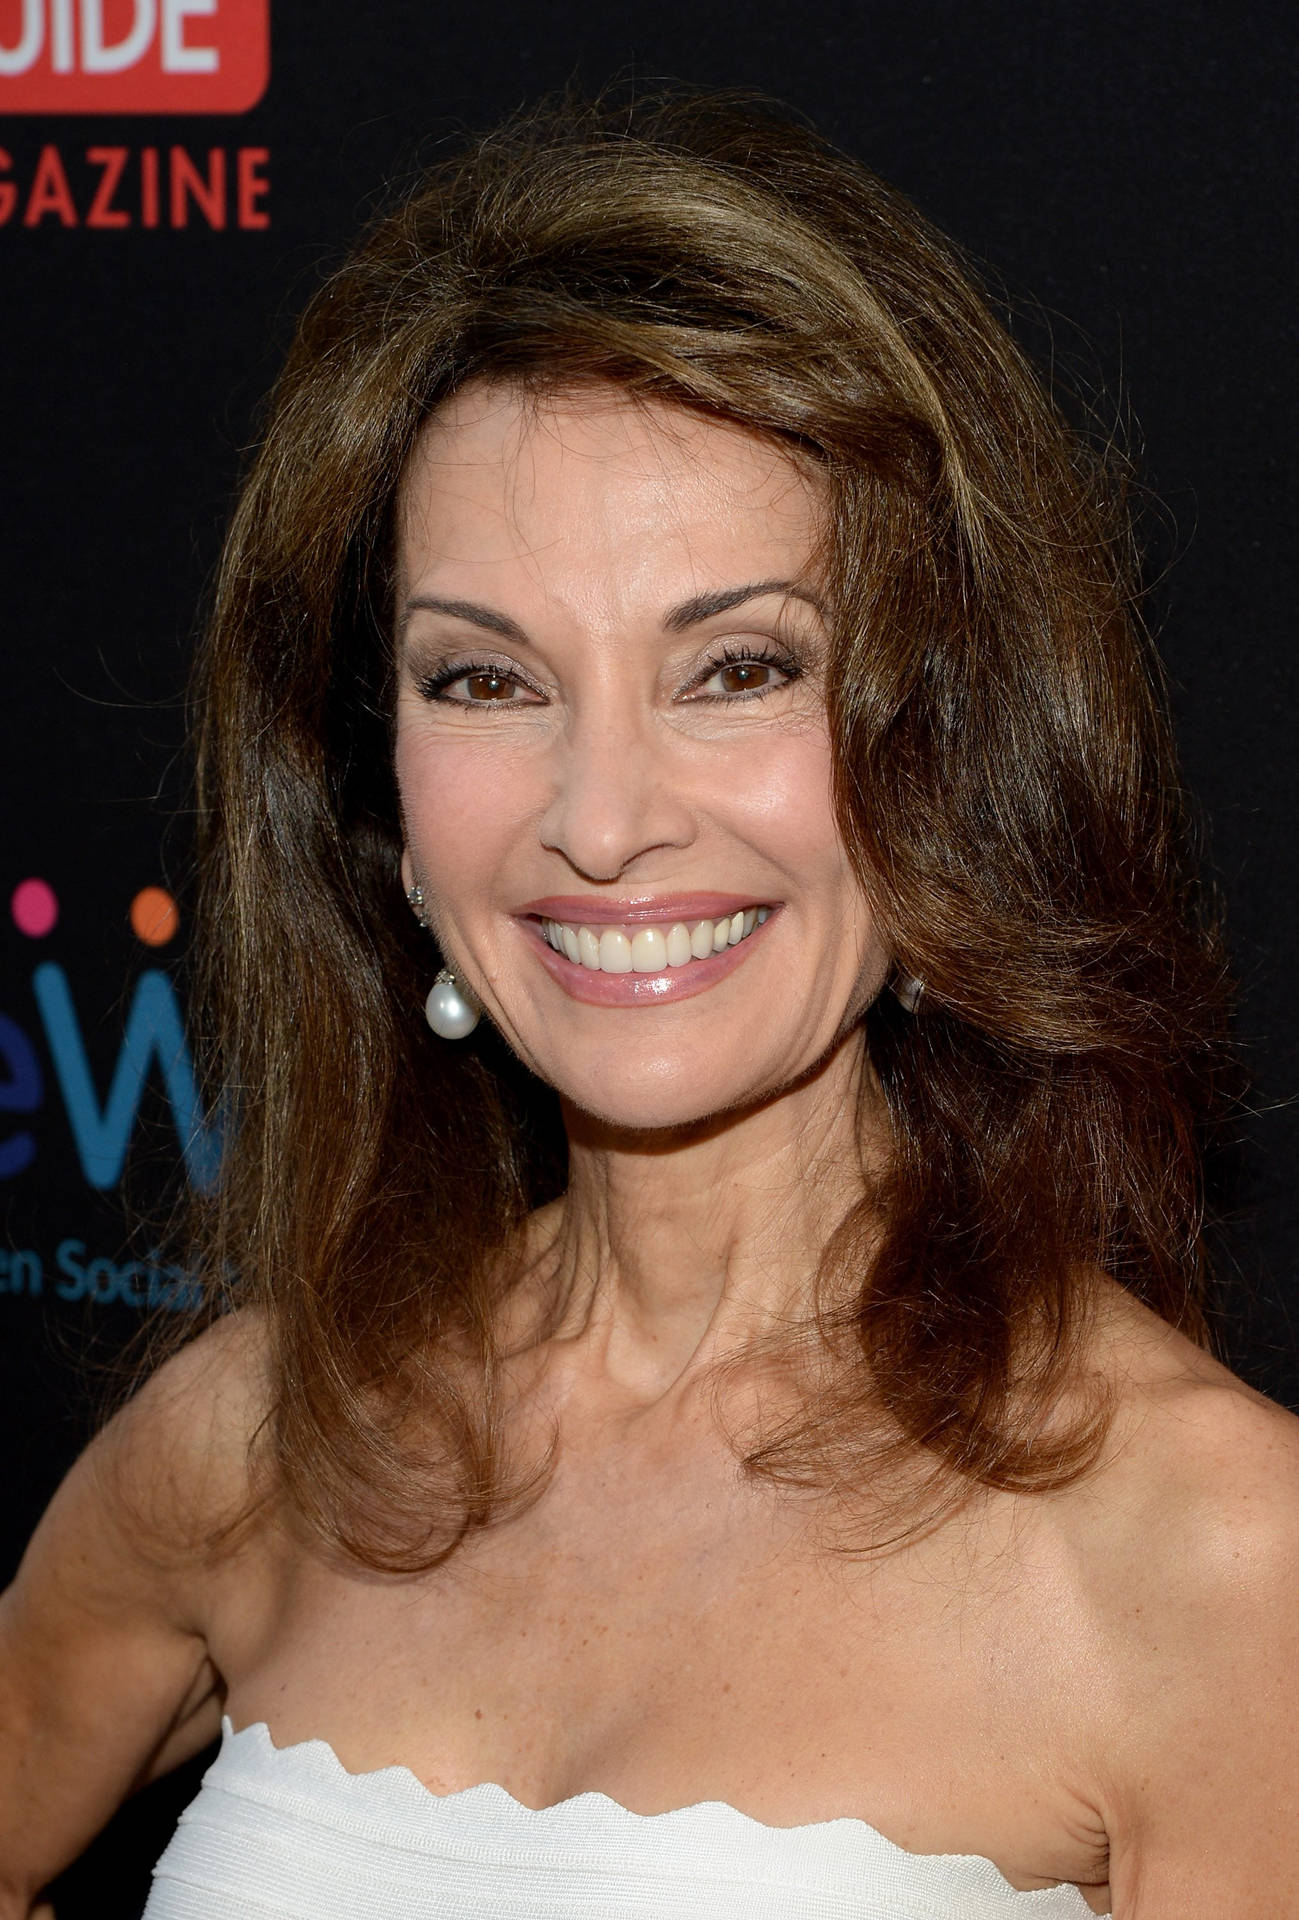 Susan Lucci Magasin Launch Event Tapet: Wallpaper